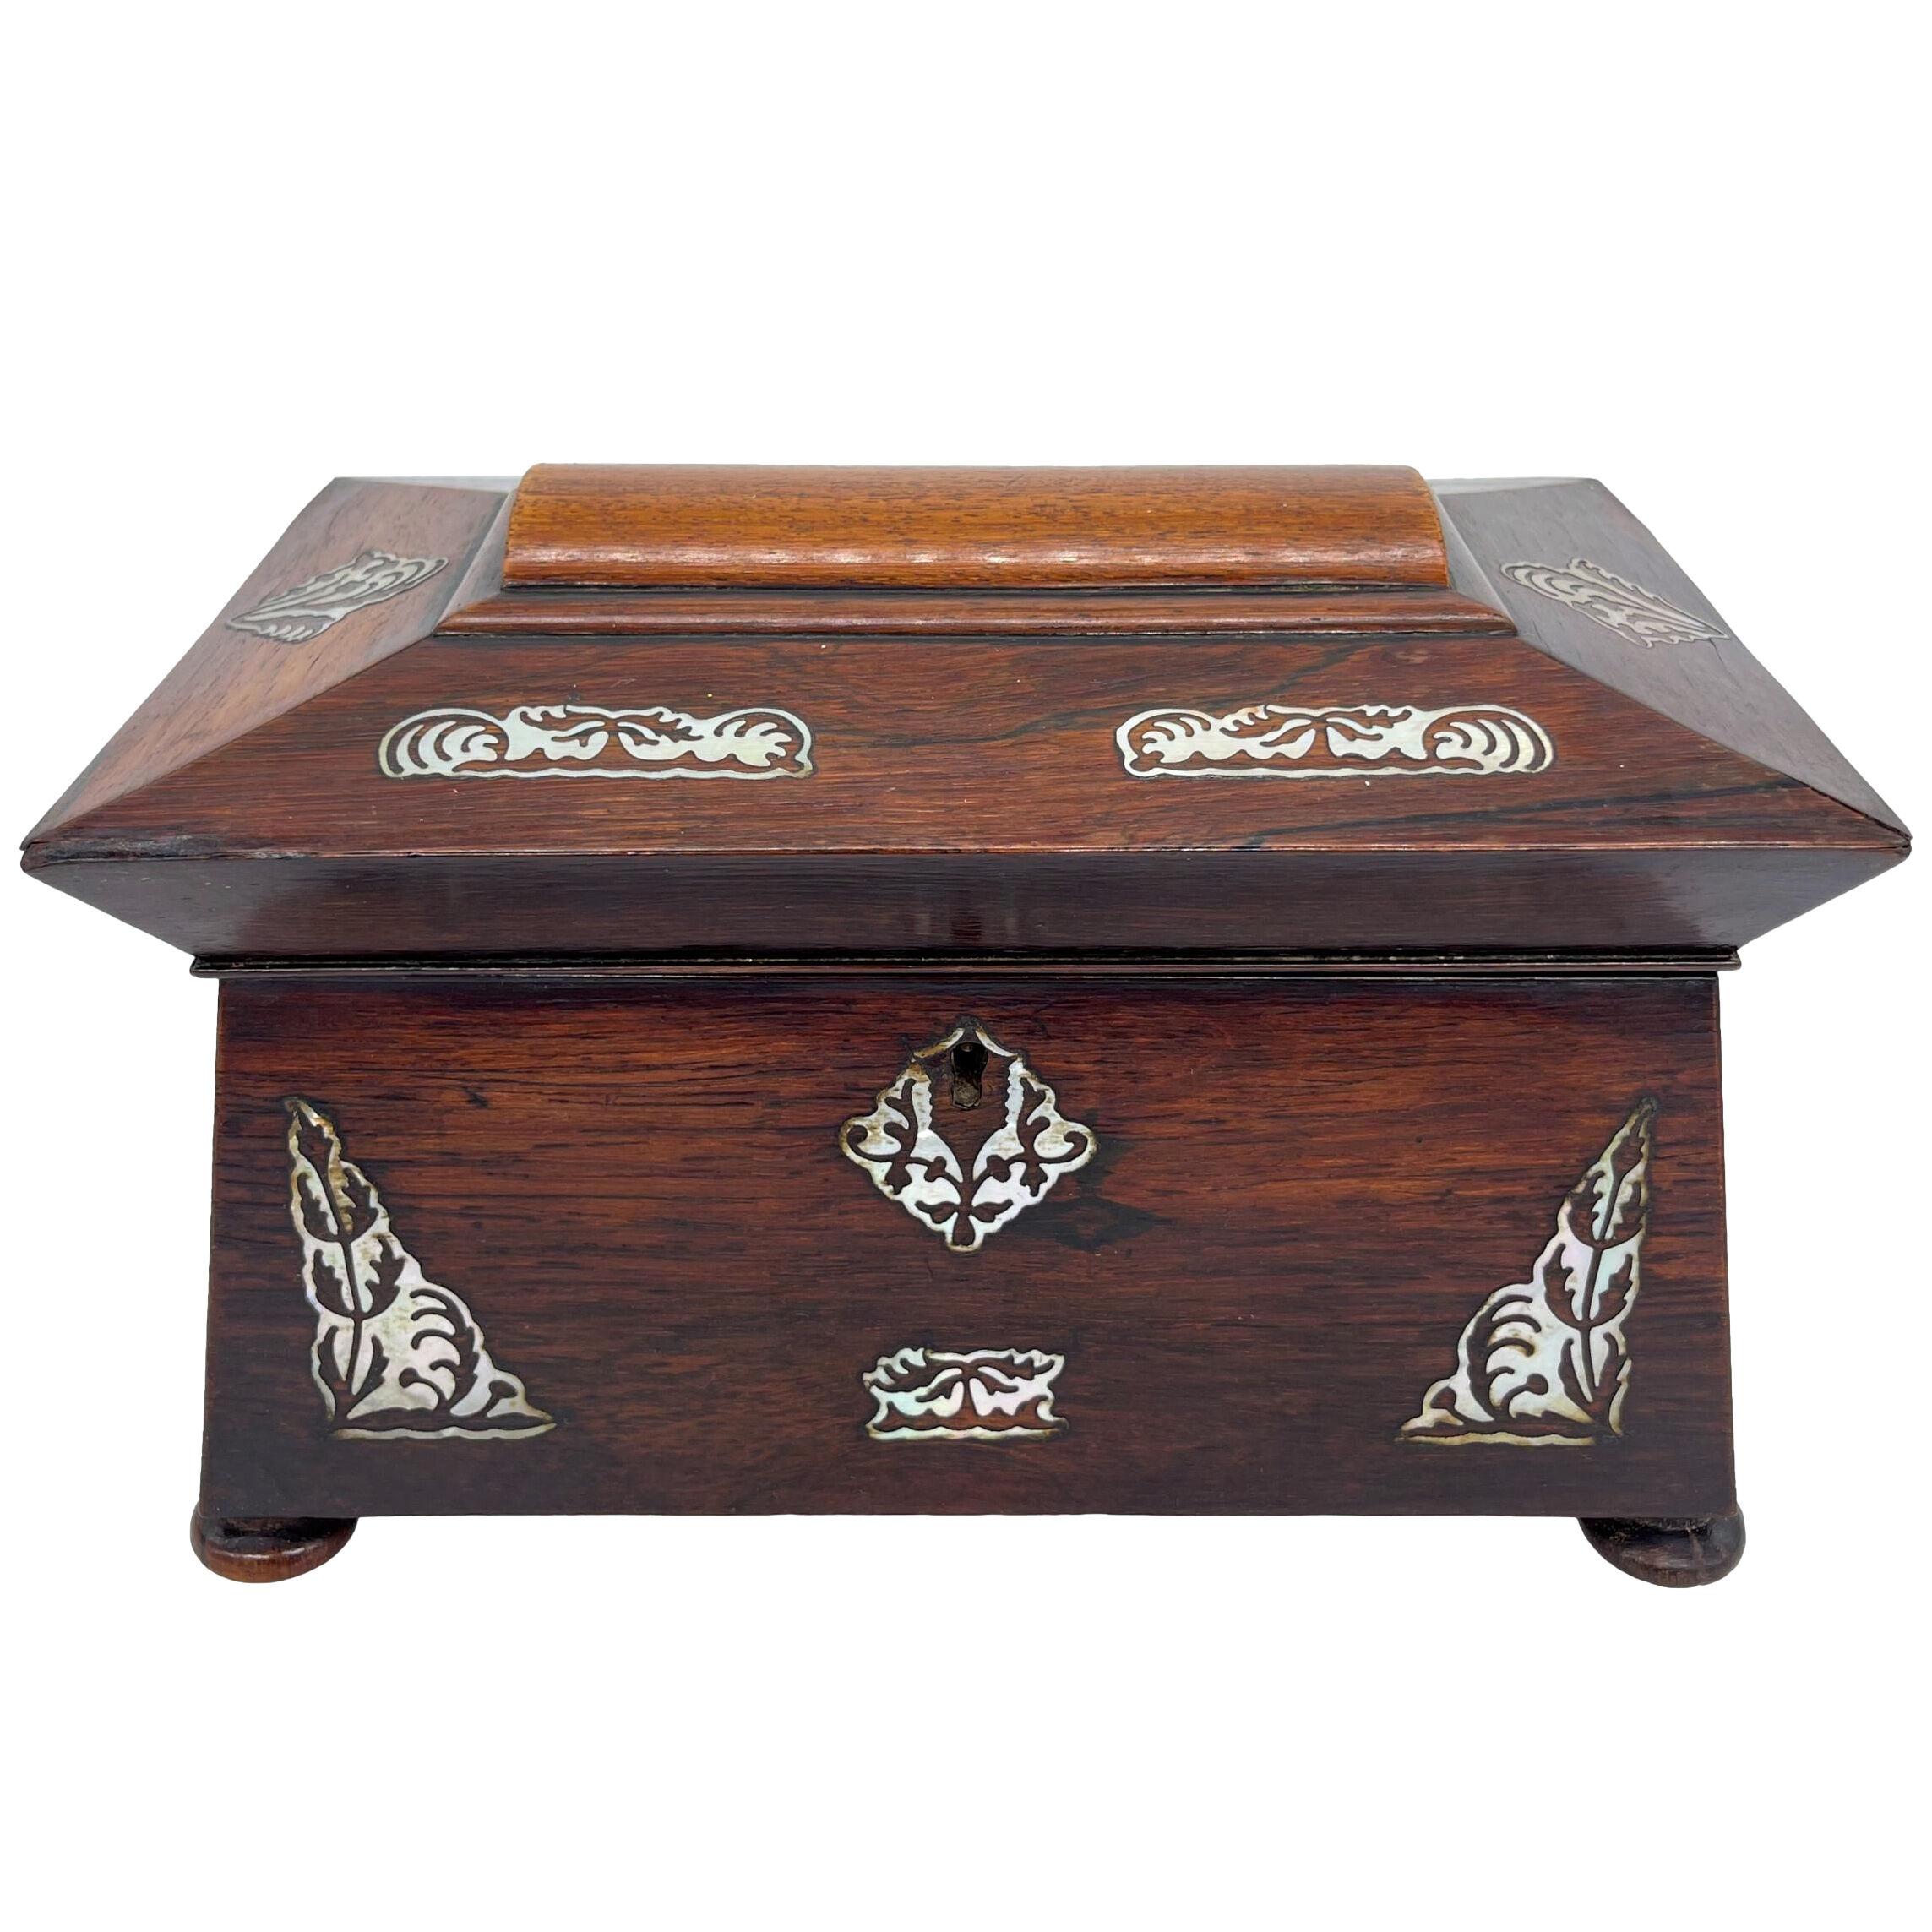 William IV Rosewood and Mother-of-Pearl Inlaid Tea Caddy, English, ca. 1835